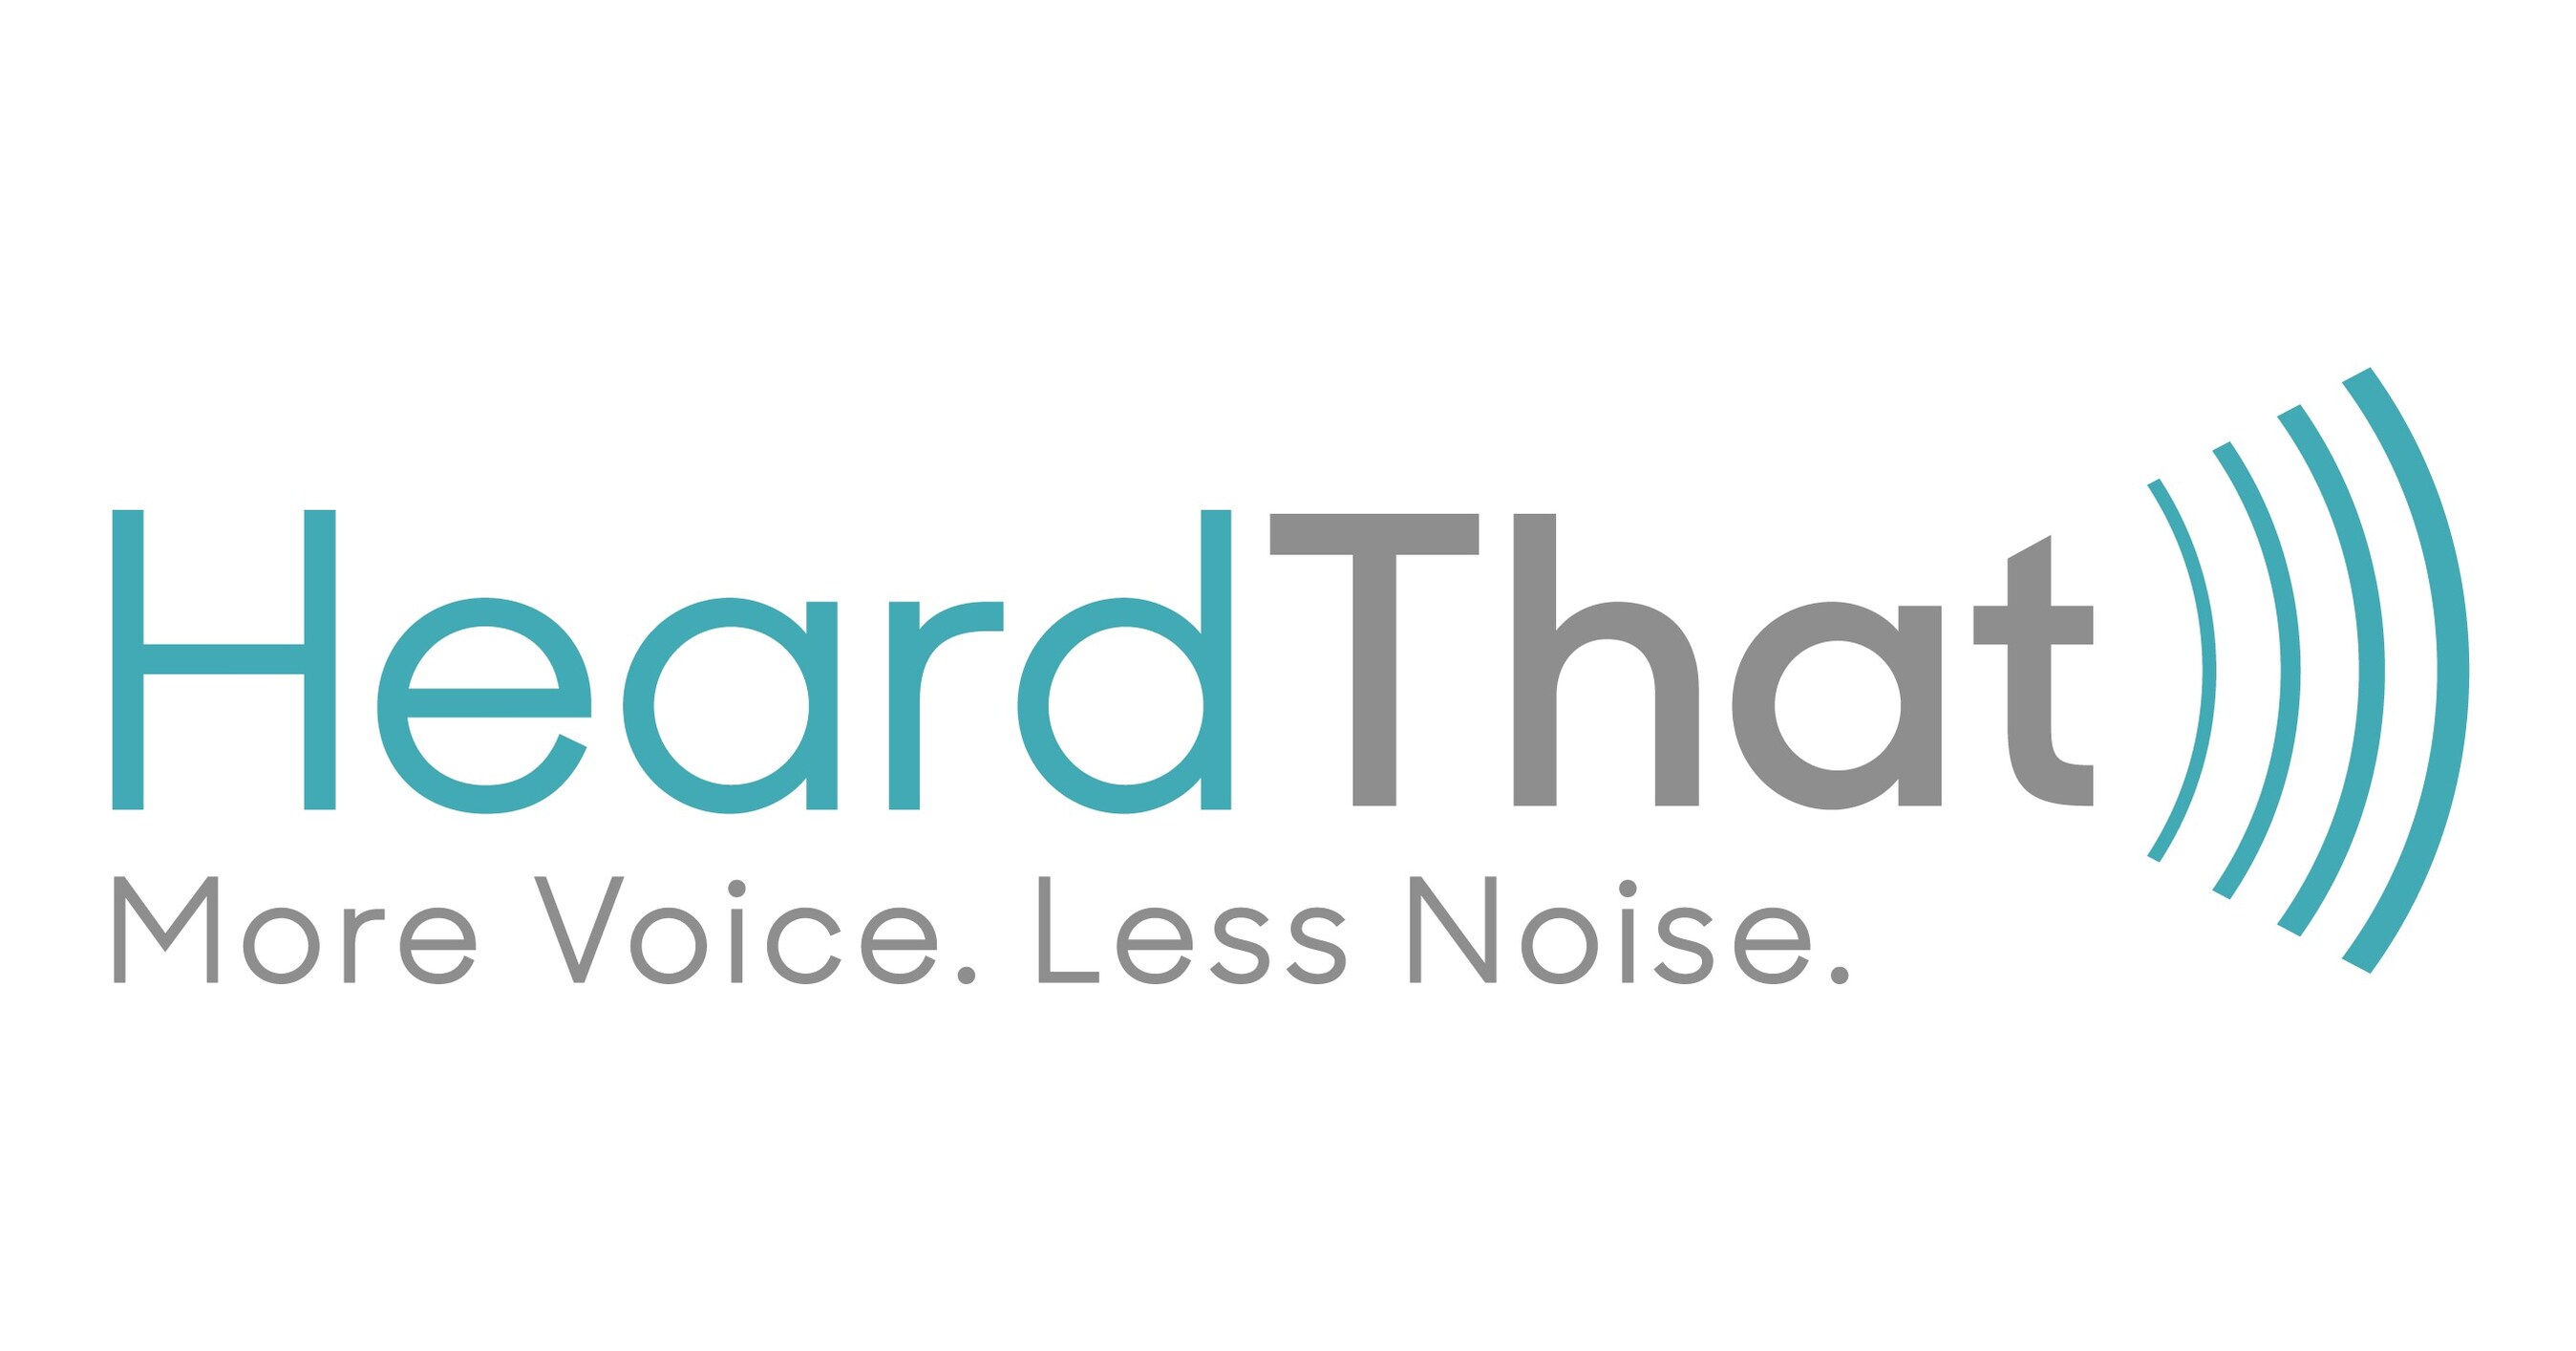 HeardThat introduces new voice isolation feature, Singl, at HLAA conference